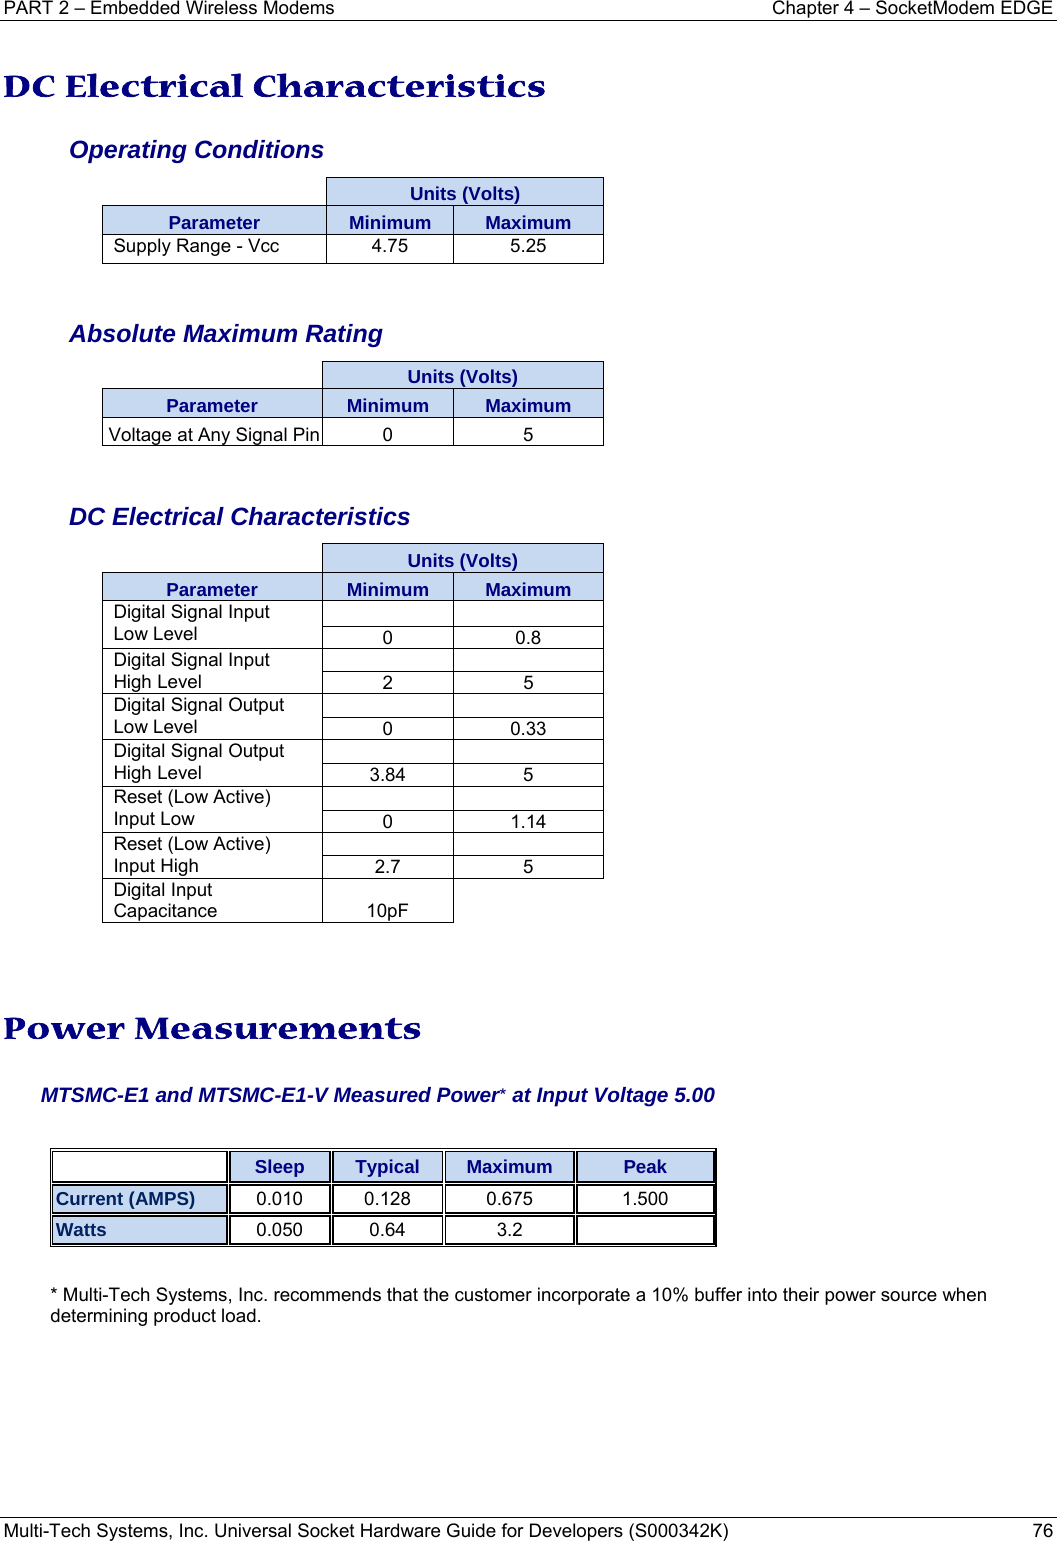 PART 2 – Embedded Wireless Modems  Chapter 4 – SocketModem EDGE Multi-Tech Systems, Inc. Universal Socket Hardware Guide for Developers (S000342K)  76   DC Electrical Characteristics  Operating Conditions Units (Volts) Parameter  Minimum  Maximum Supply Range - Vcc  4.75  5.25   Absolute Maximum Rating Units (Volts) Parameter  Minimum  Maximum Voltage at Any Signal Pin  0  5   DC Electrical Characteristics Units (Volts) Parameter  Minimum  Maximum Digital Signal Input  Low Level      0 0.8 Digital Signal Input High Level      2 5 Digital Signal Output Low Level      0 0.33 Digital Signal Output High Level      3.84 5 Reset (Low Active) Input Low      0 1.14 Reset (Low Active) Input High      2.7 5 Digital Input Capacitance 10pF    Power Measurements  MTSMC-E1 and MTSMC-E1-V Measured Power* at Input Voltage 5.00     Sleep  Typical  Maximum  Peak Current (AMPS) 0.010 0.128 0.675 1.500Watts 0.050 0.64 3.2   * Multi-Tech Systems, Inc. recommends that the customer incorporate a 10% buffer into their power source when determining product load.   